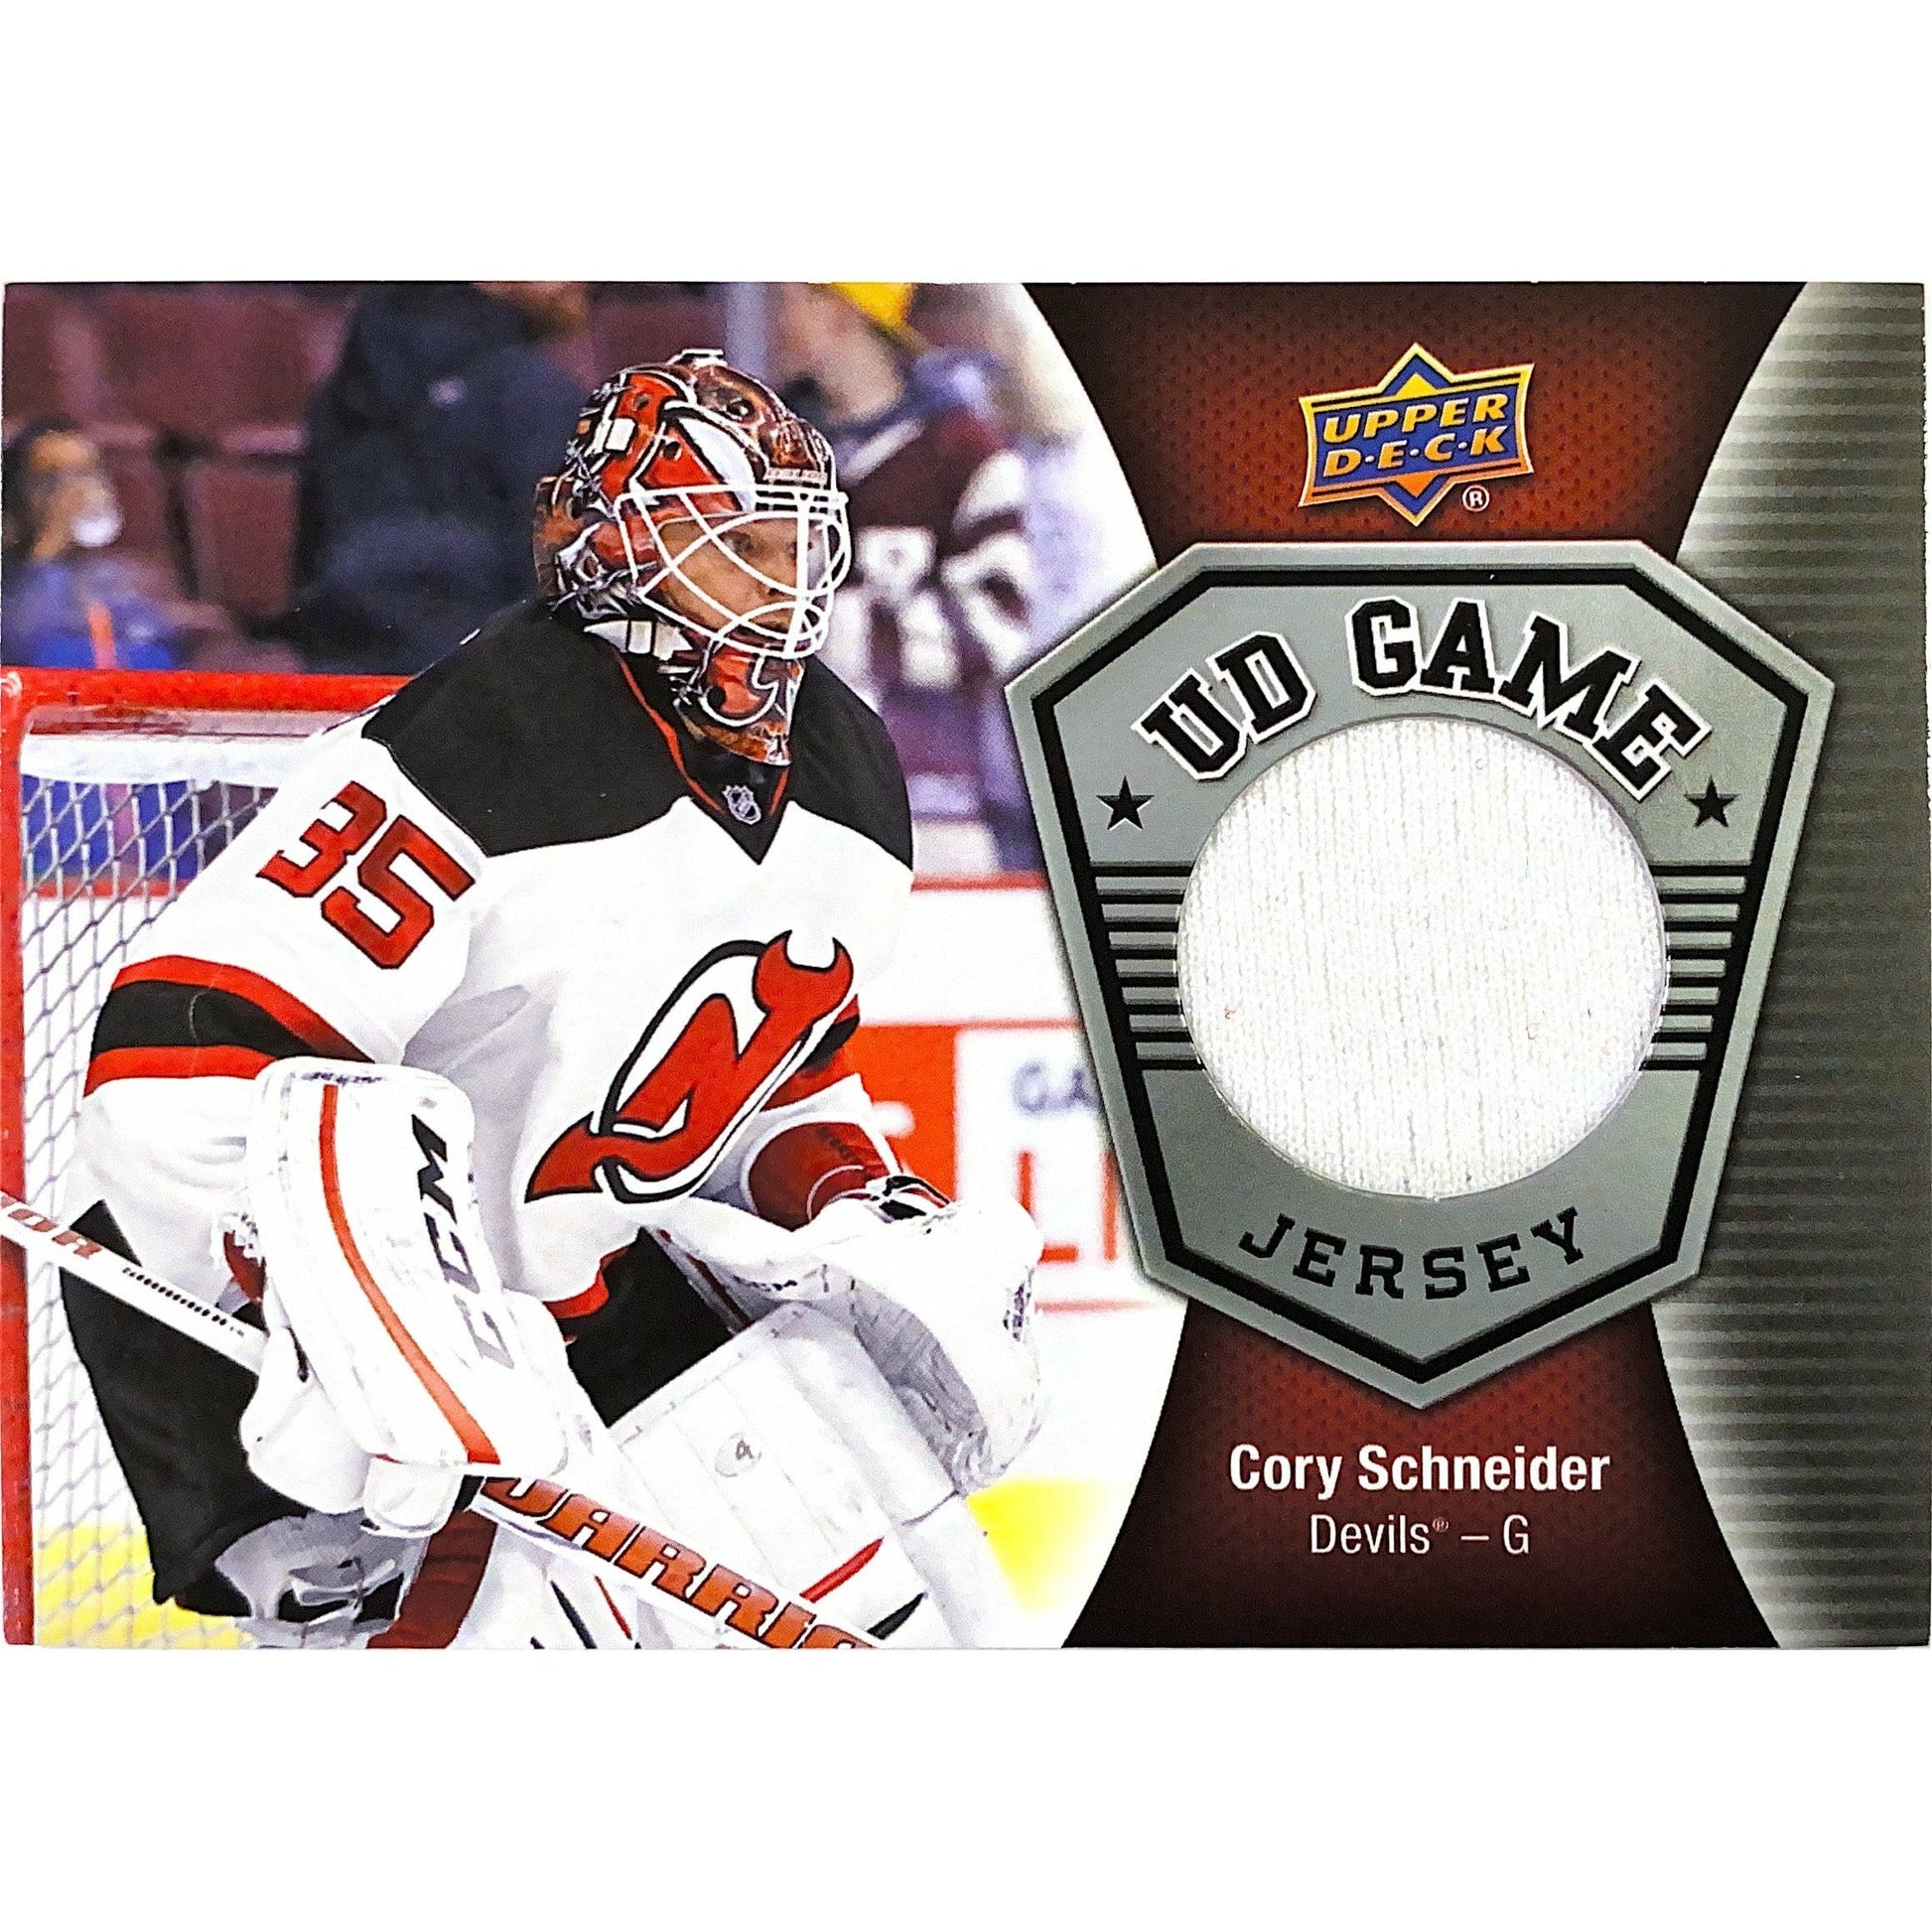  2016-17 Upper Deck Series 1 Cory Schneider UD Game Jersey  Local Legends Cards & Collectibles